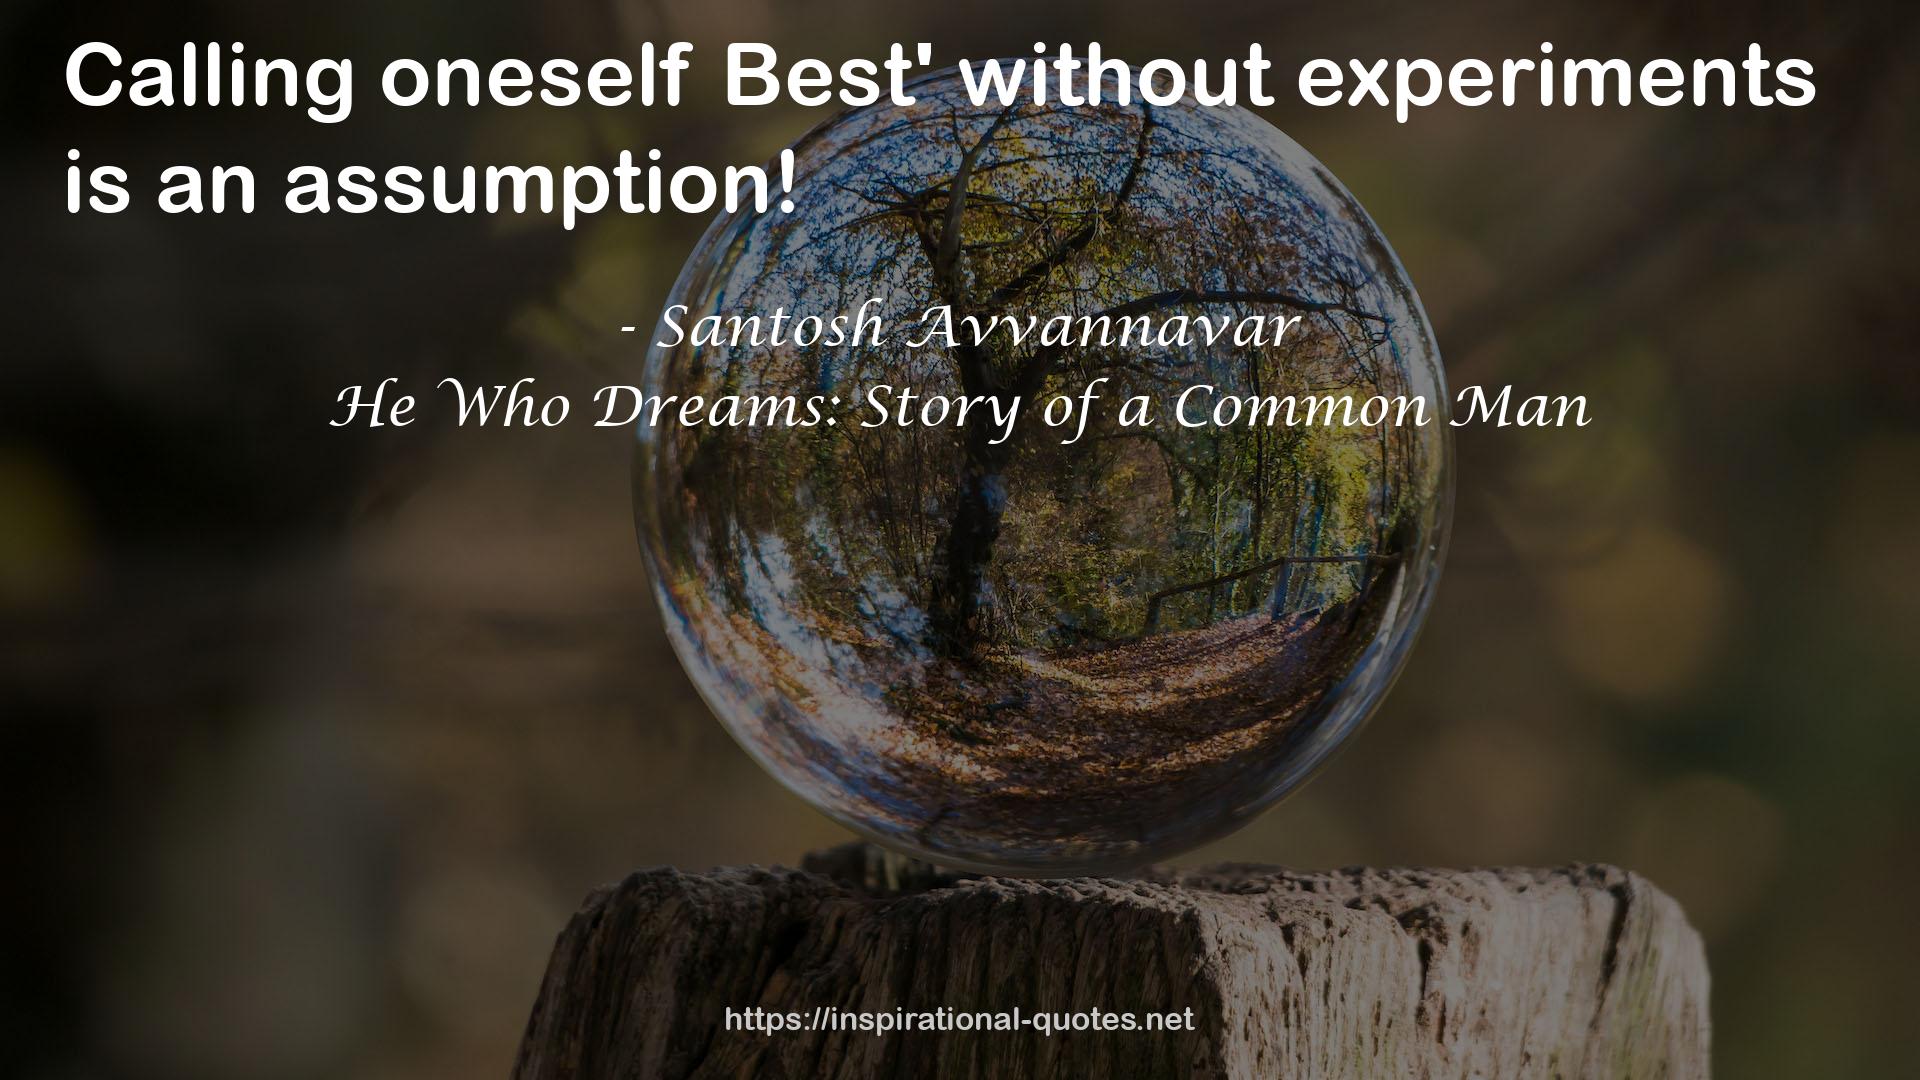 He Who Dreams: Story of a Common Man QUOTES